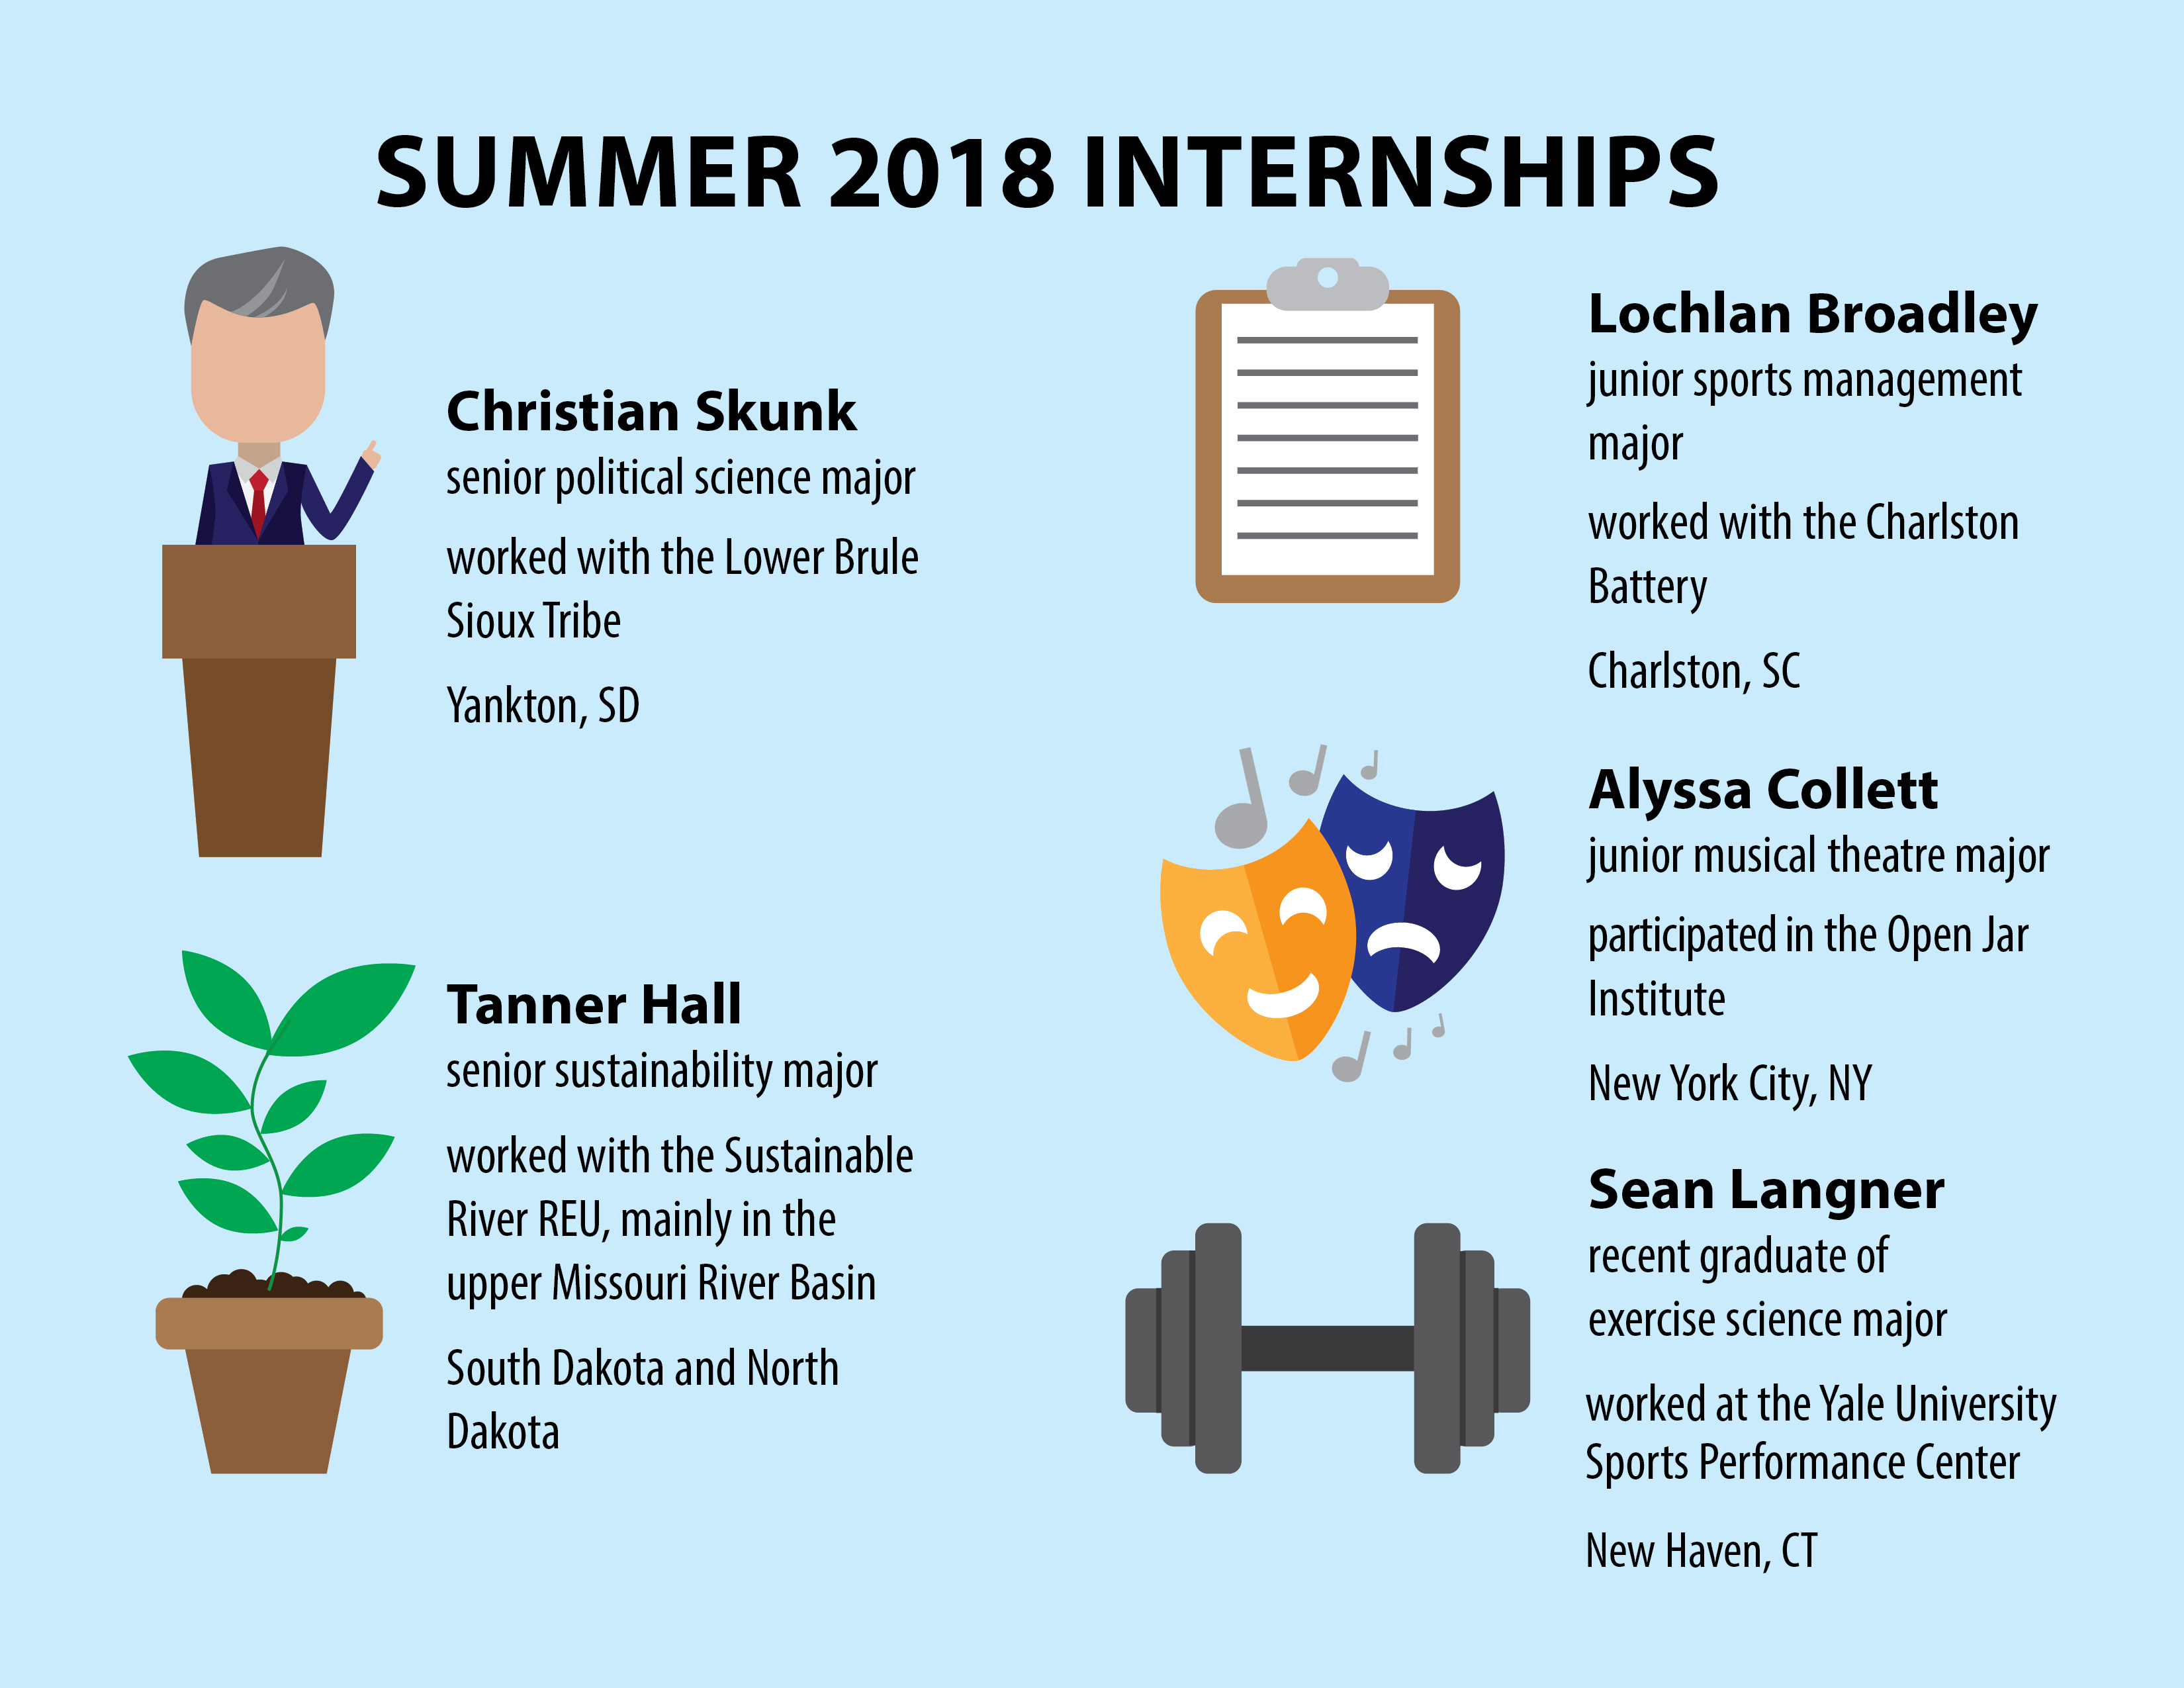 Students complete various summer internships across nation